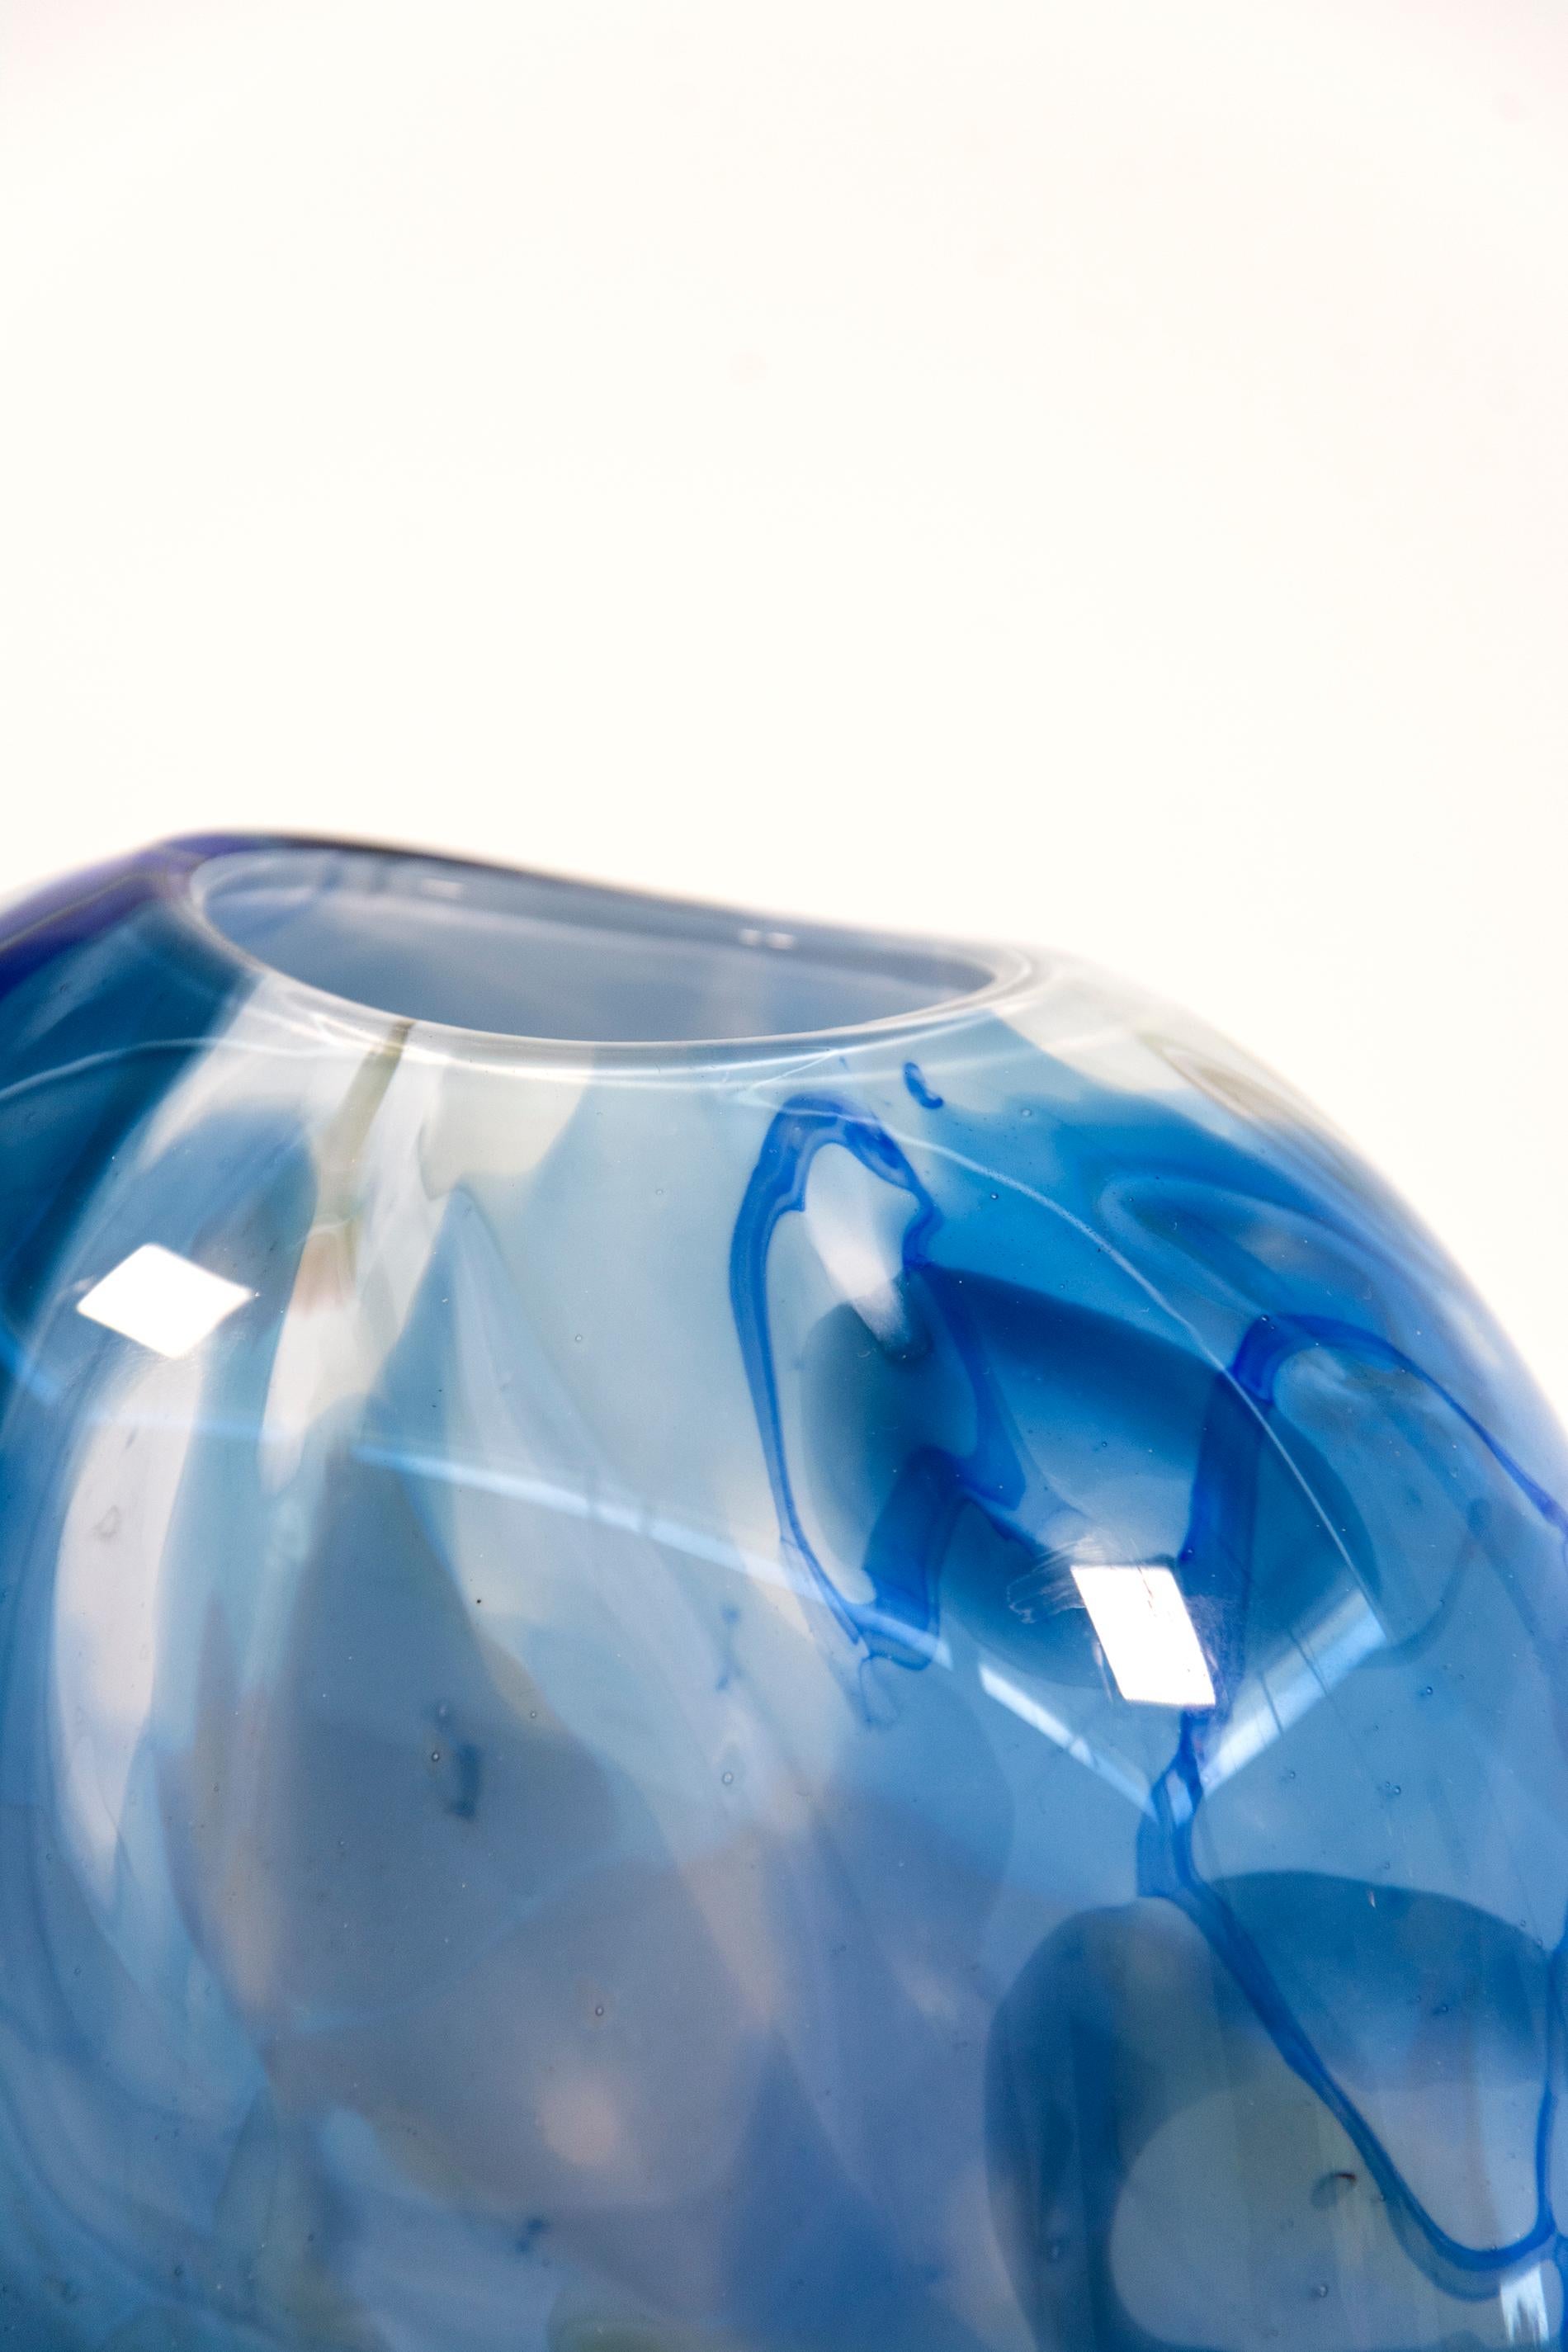 Large Flattened Form with Shards and Cane in Blues - blown glass vessel - Contemporary Sculpture by Susan Rankin